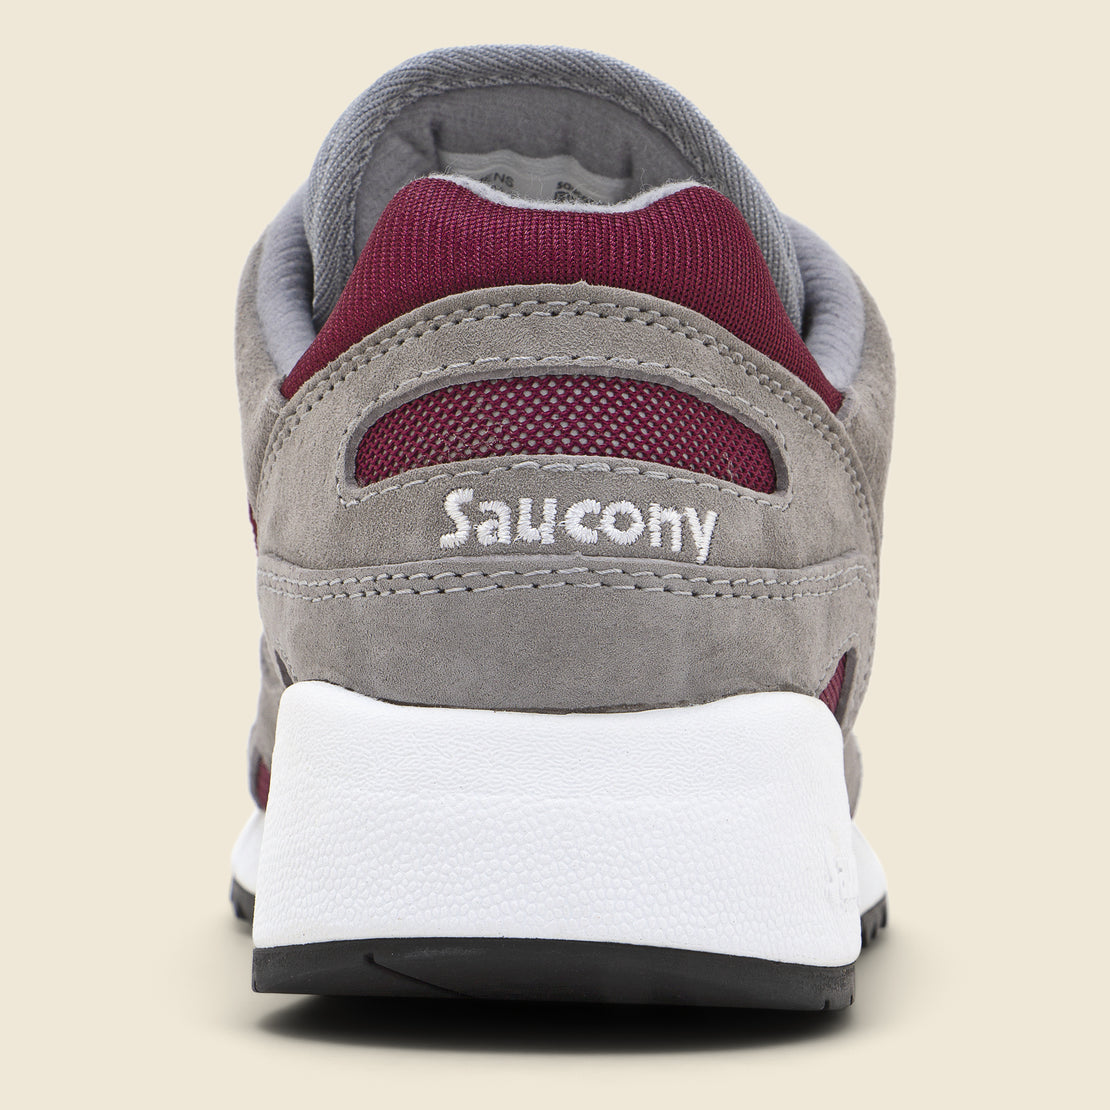 Shadow 6000 Sneaker - Grey/Burgundy - Saucony - STAG Provisions - Shoes - Athletic